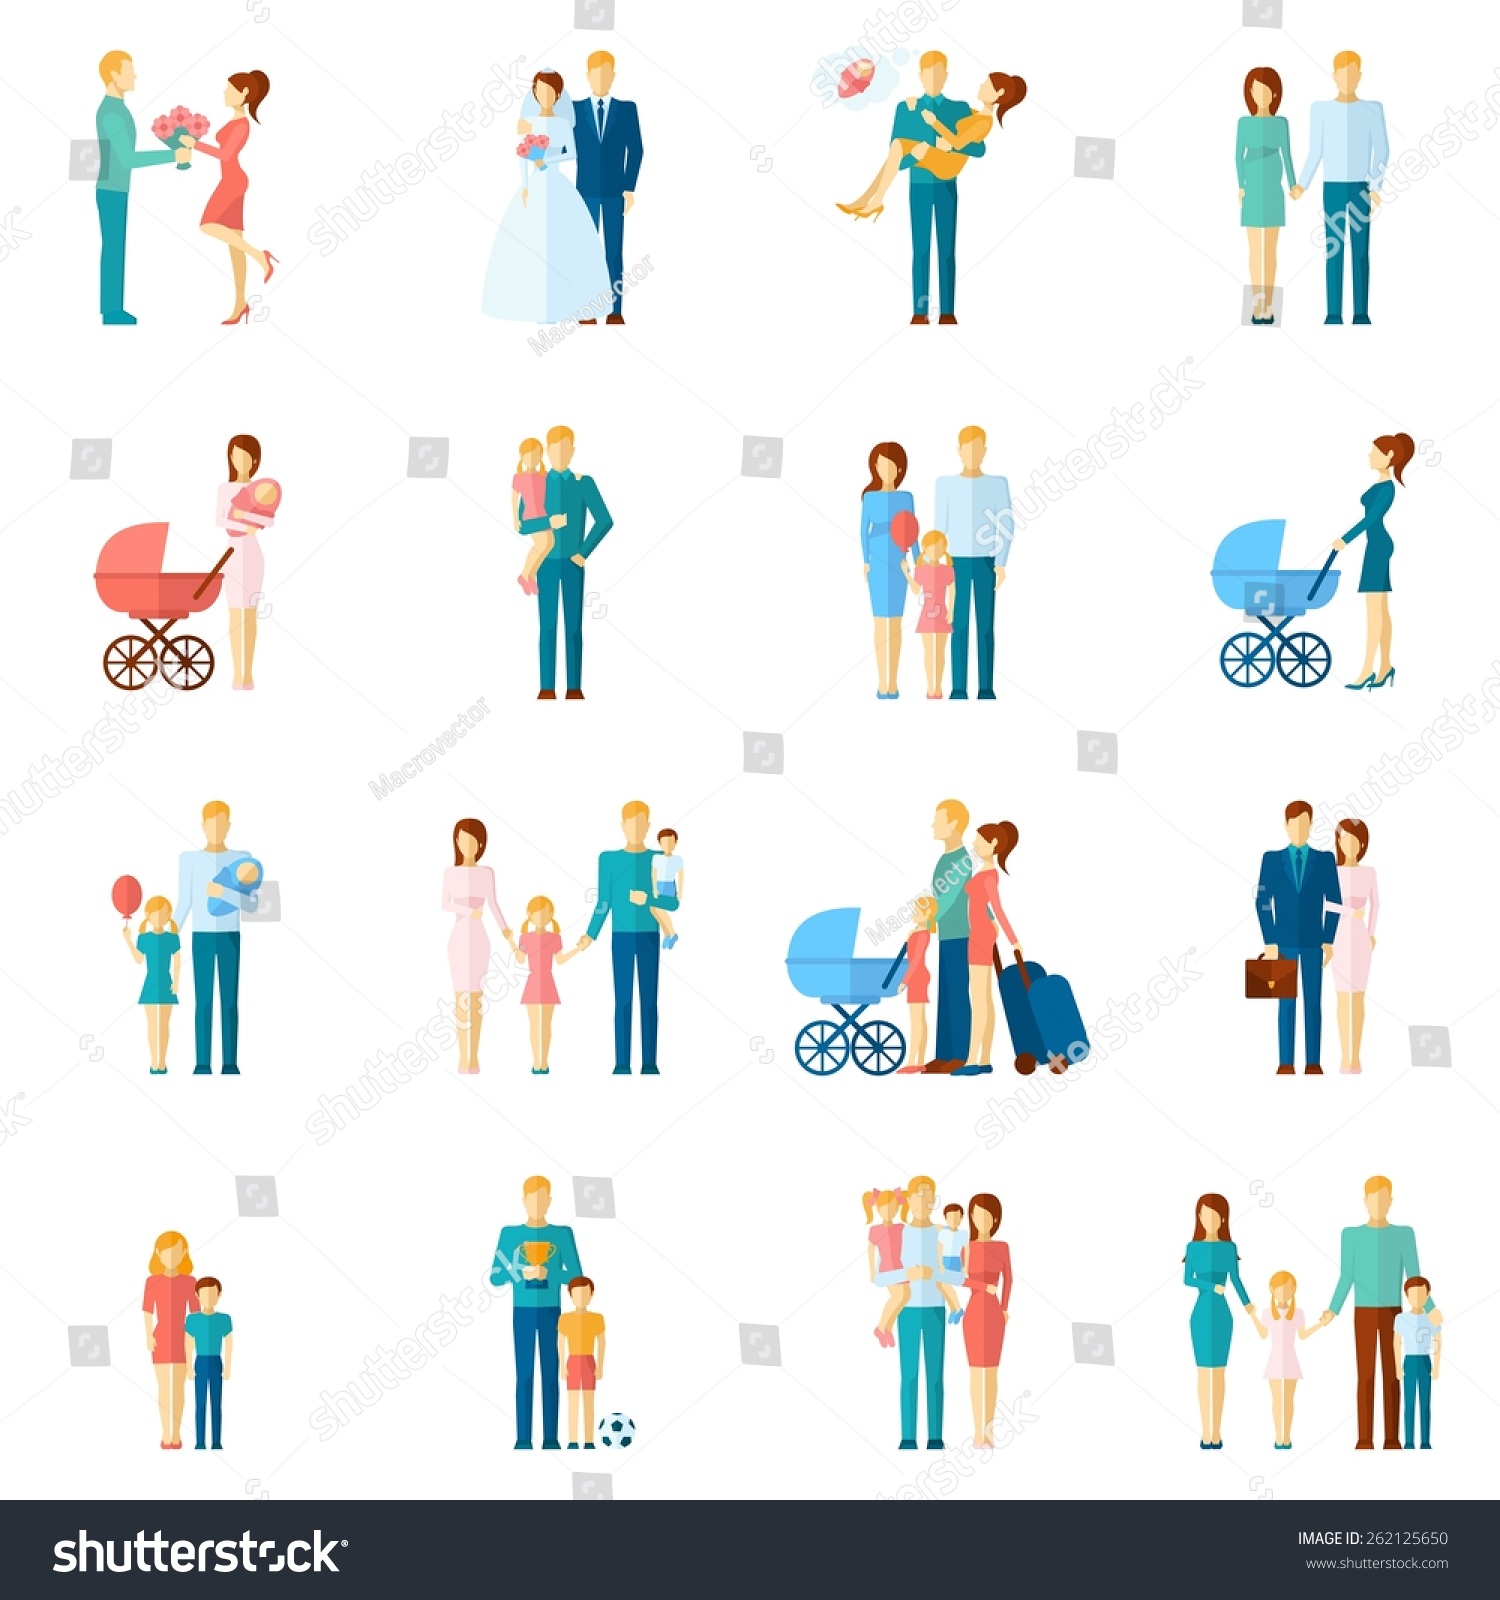 Family Icons Set With Married Couple People Relationship Symbols ...